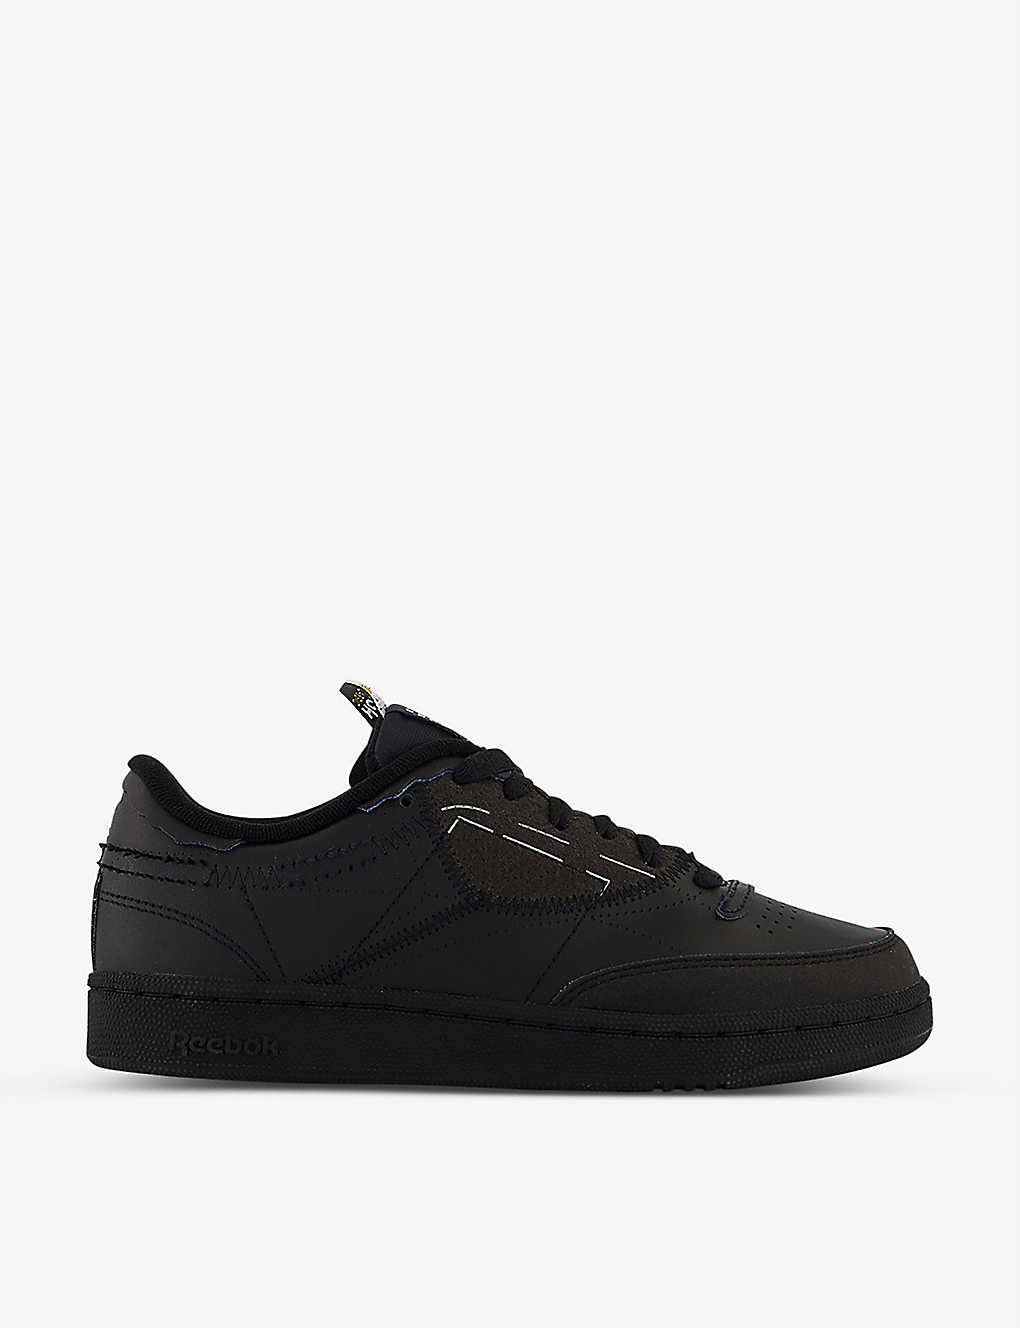 Adidas Statement Reebok X Maison Margiela Project 0 Club C Leather Low-top Trainers In Black